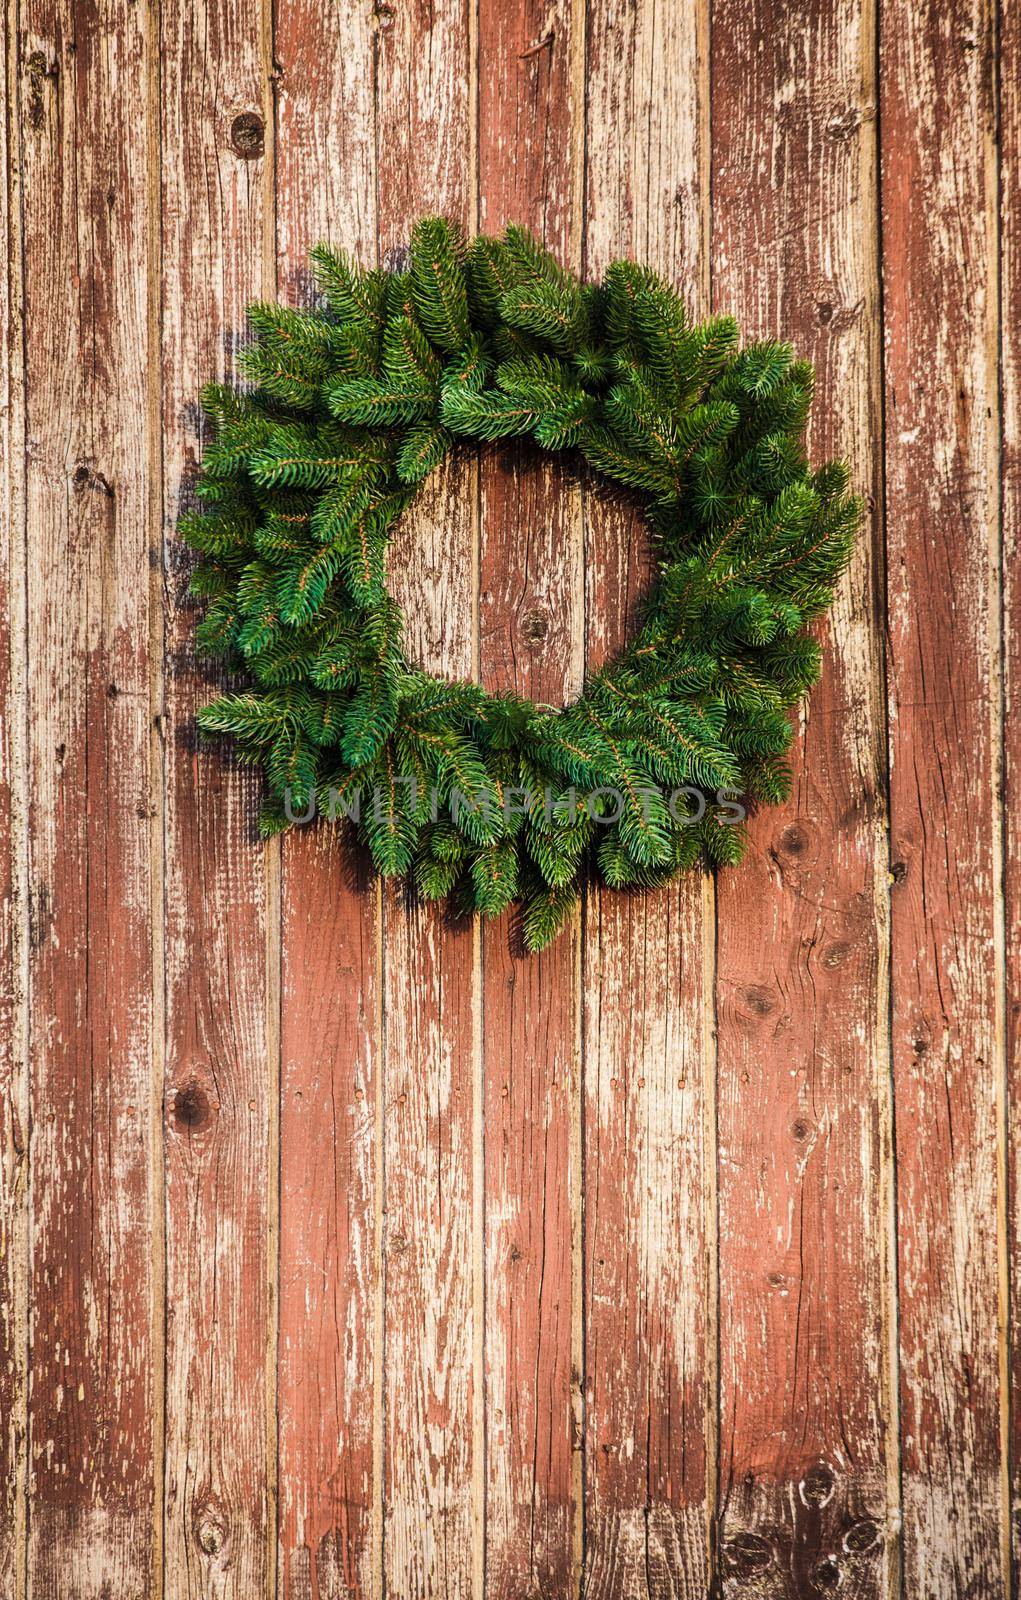 Christmas wreath on the shabby wooden door. Christmas holiday background with copy space